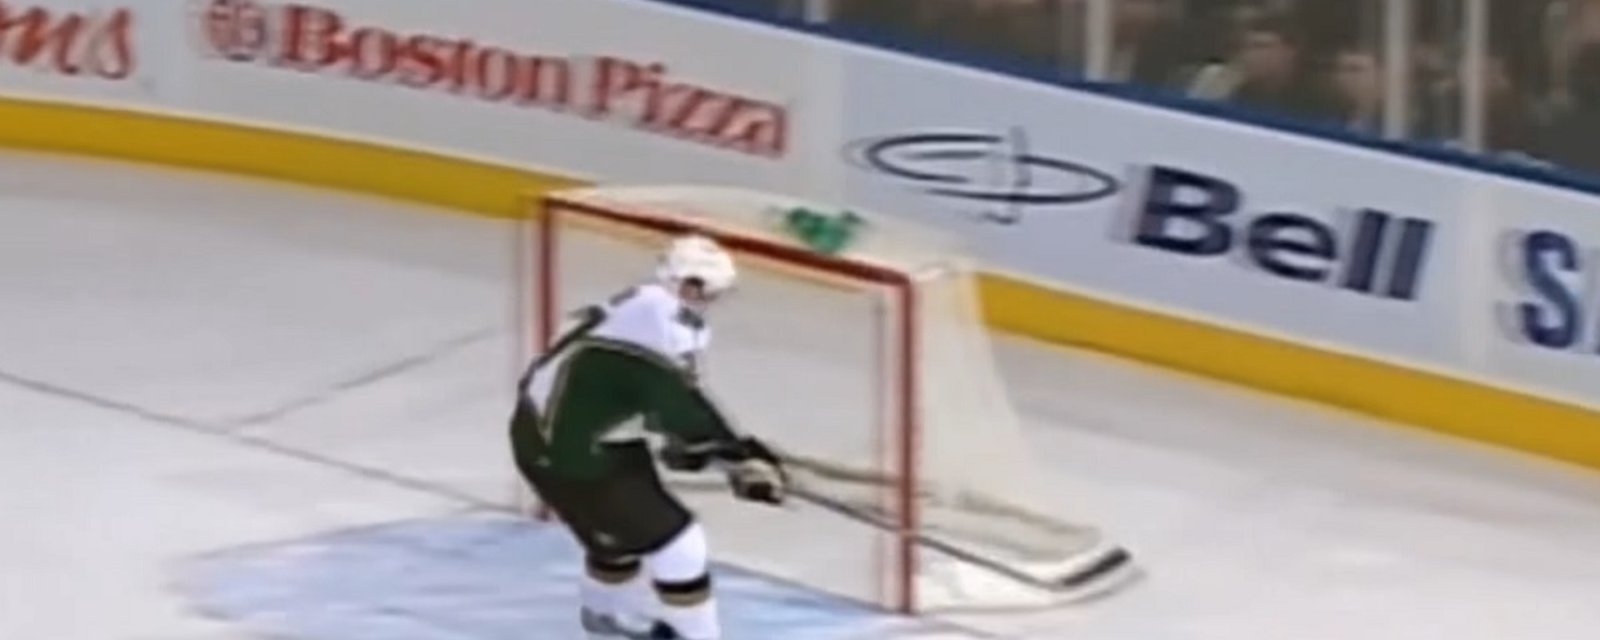 One of the biggest fails in NHL history turns 10 years old today.